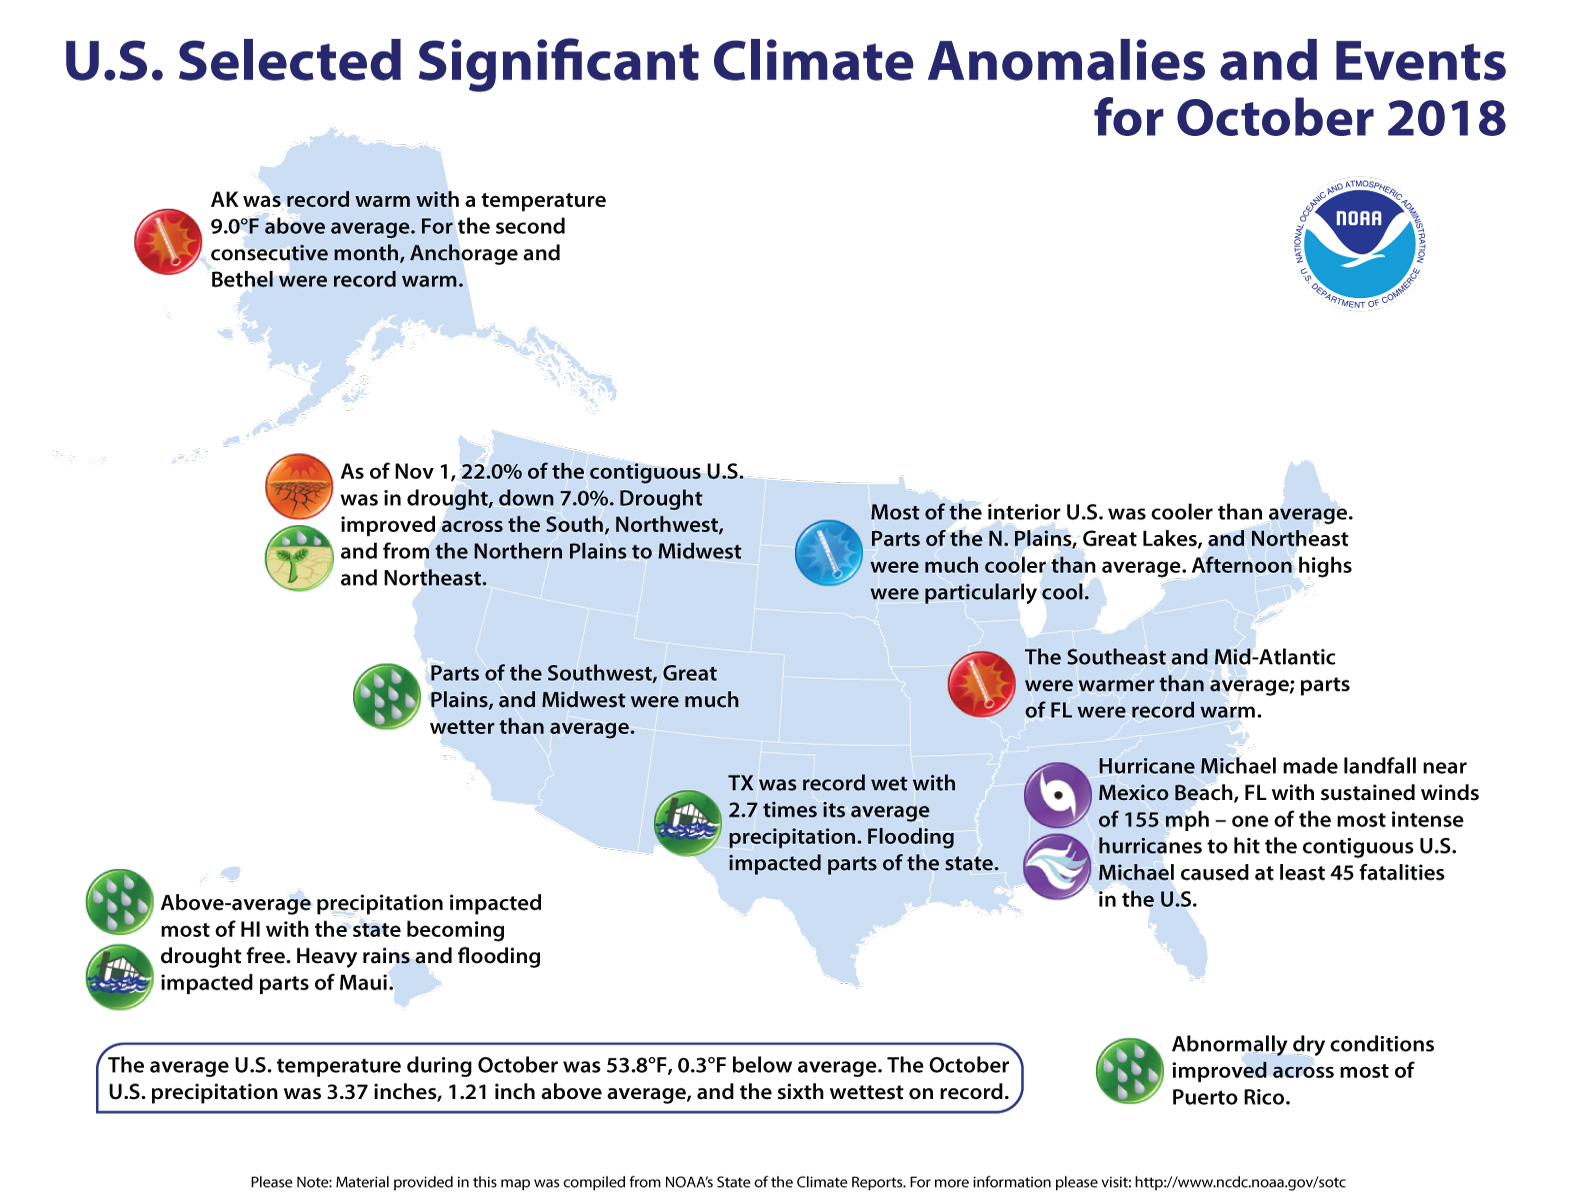 An annotated map of the United States showing notable climate events that occurred in October 2018. 